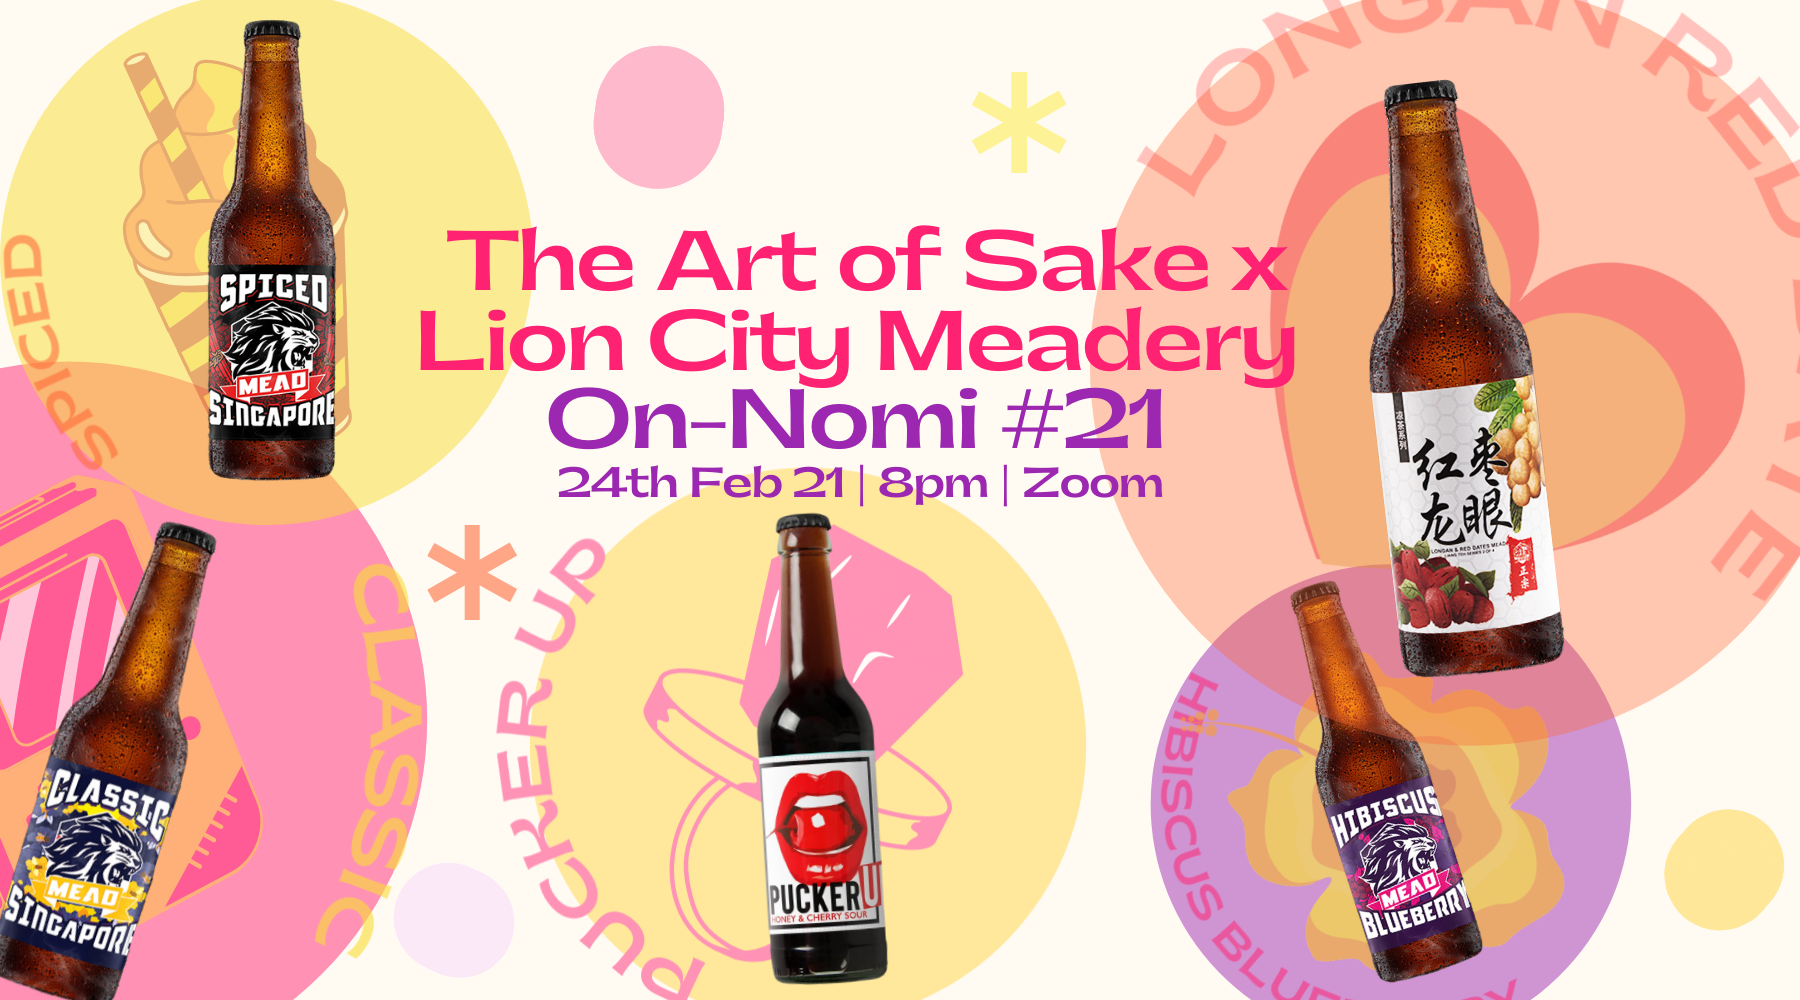 The Art of Sake x Lion City Meadery On-nomi #21